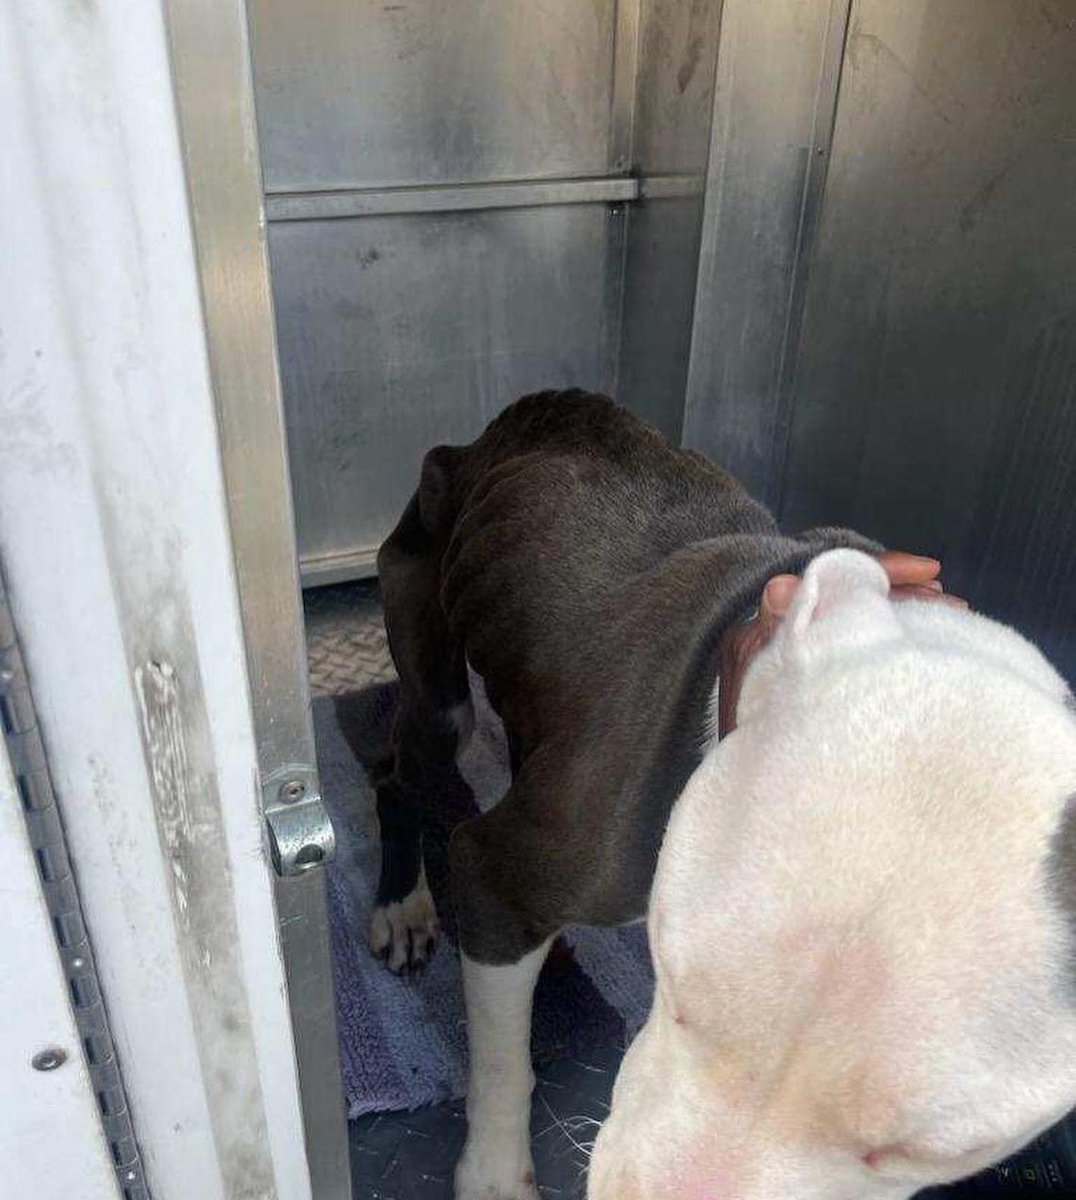 ‼️URGENT #Rescue in Progress. This sweet girl pulled at our heart strings and was found fending for herself in the garbage in Detroit. The photos don't show how skinny she really is. We've named her Angel & she needs our help. Please help by donating at DetroitDogRescue.com